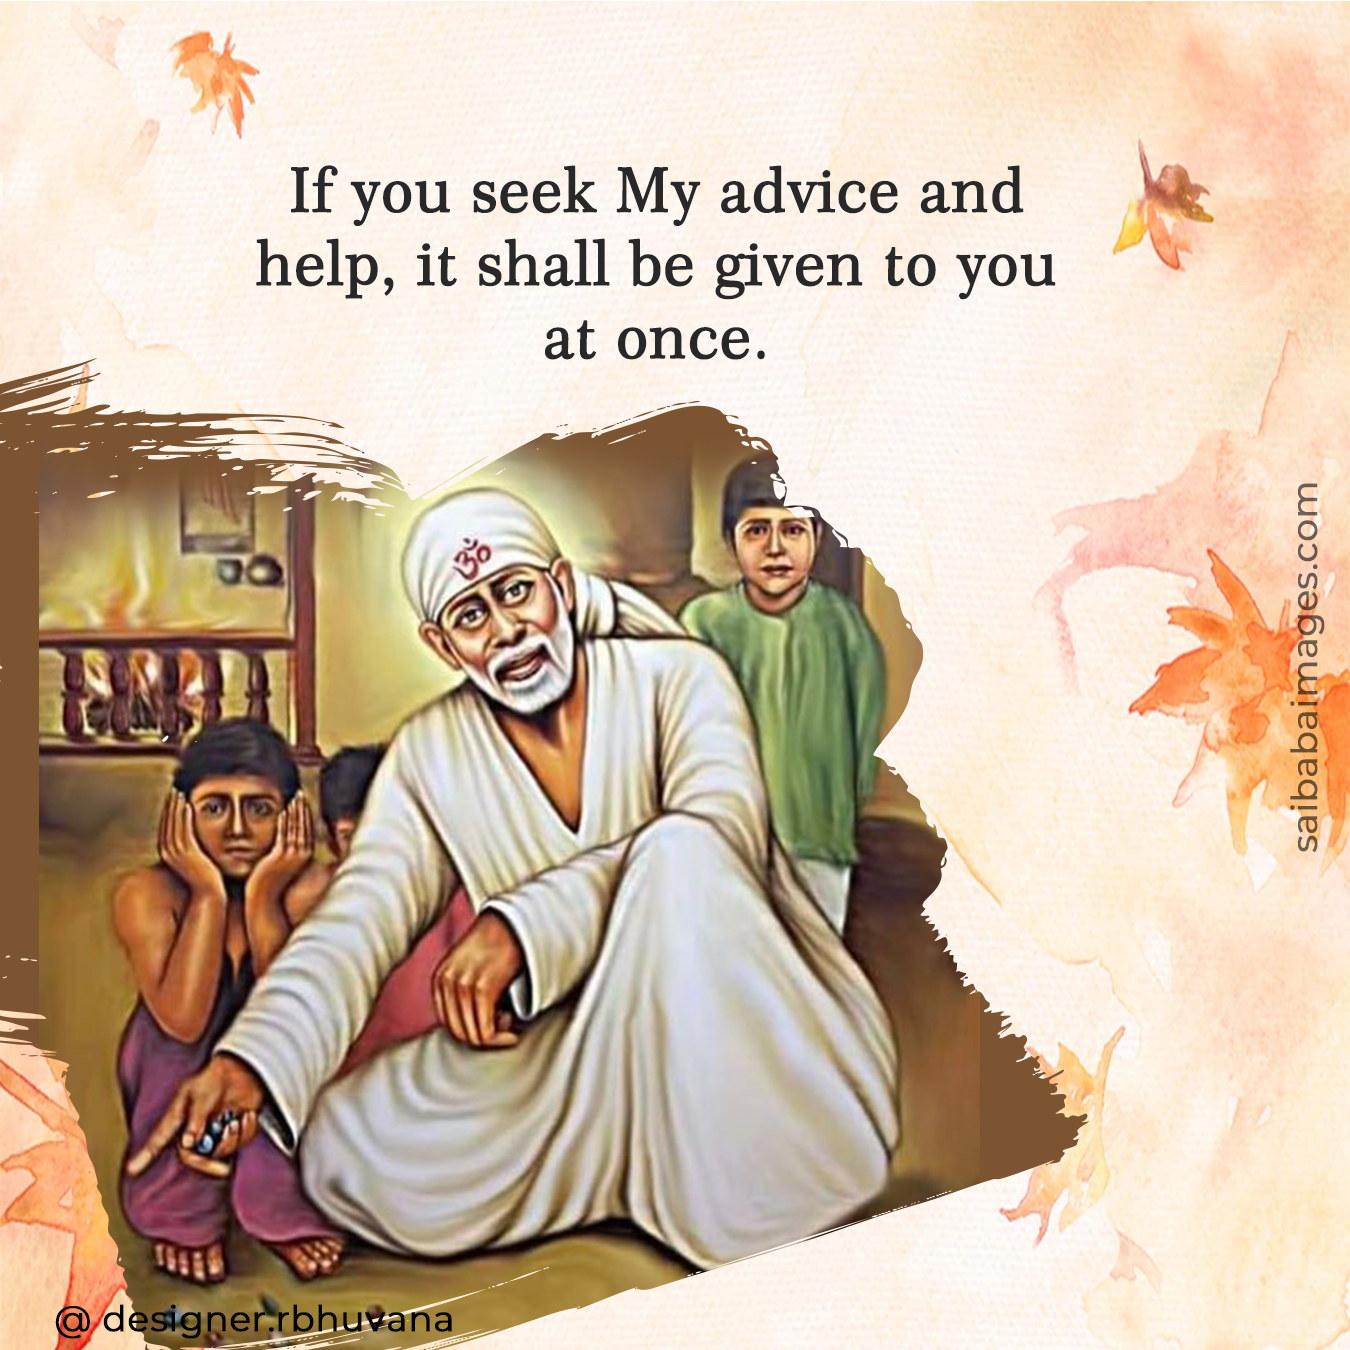 60+ Best Sai Baba Painting Ideas In 2023 - Sai Baba Images with ...